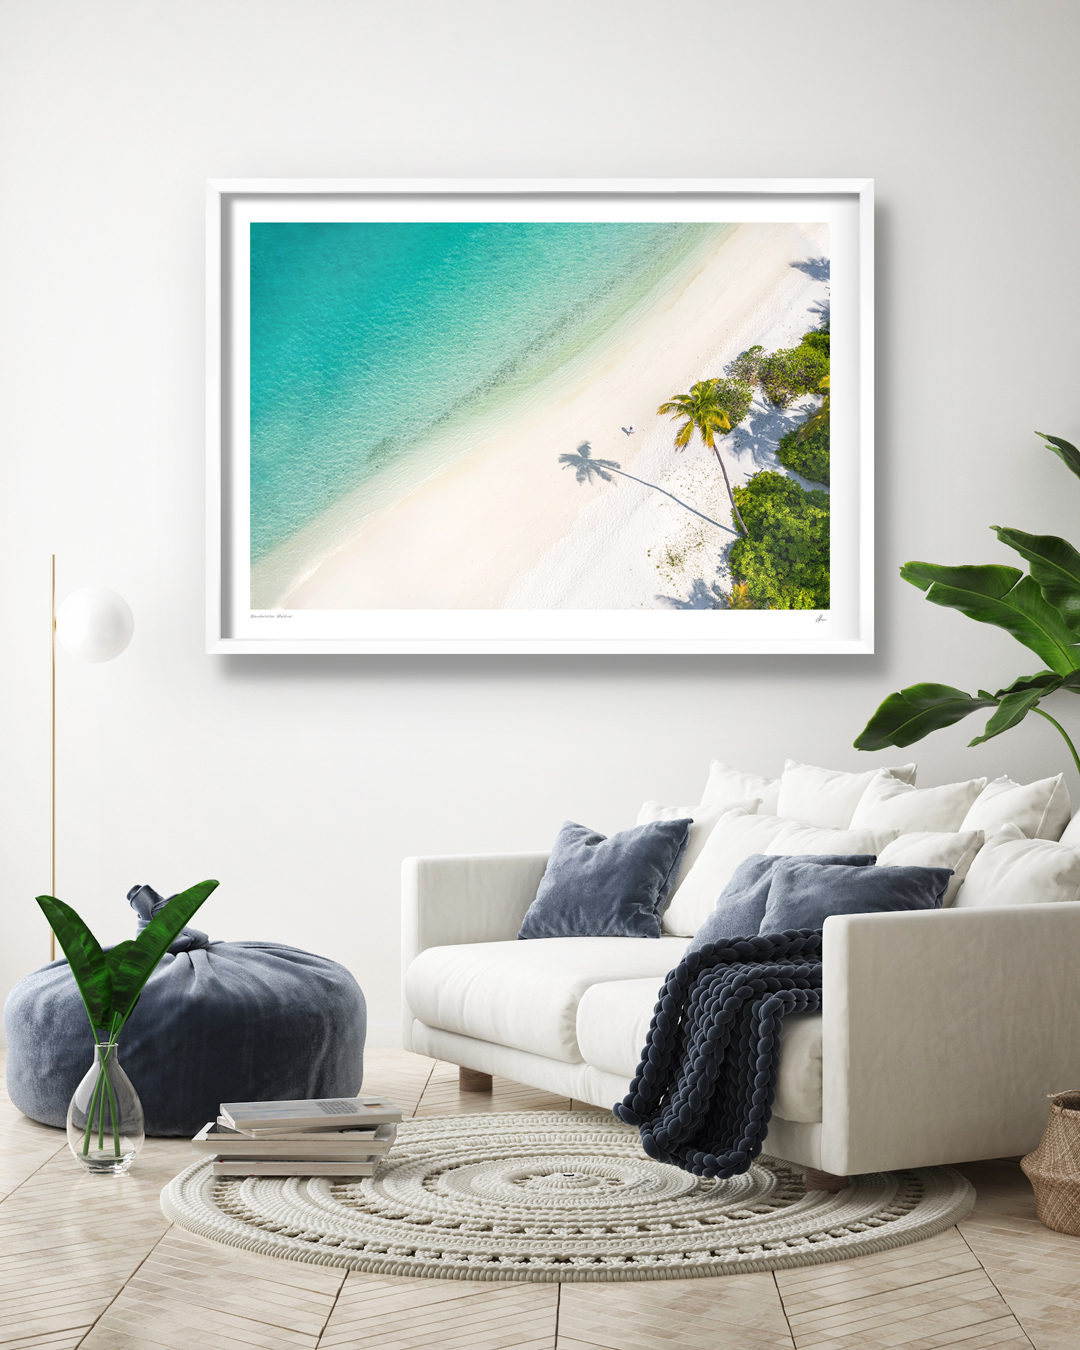 Interior design inspiration. Fine art framed print of Wanderluster, turquoise water, white sands and palm trees in the Maldives.